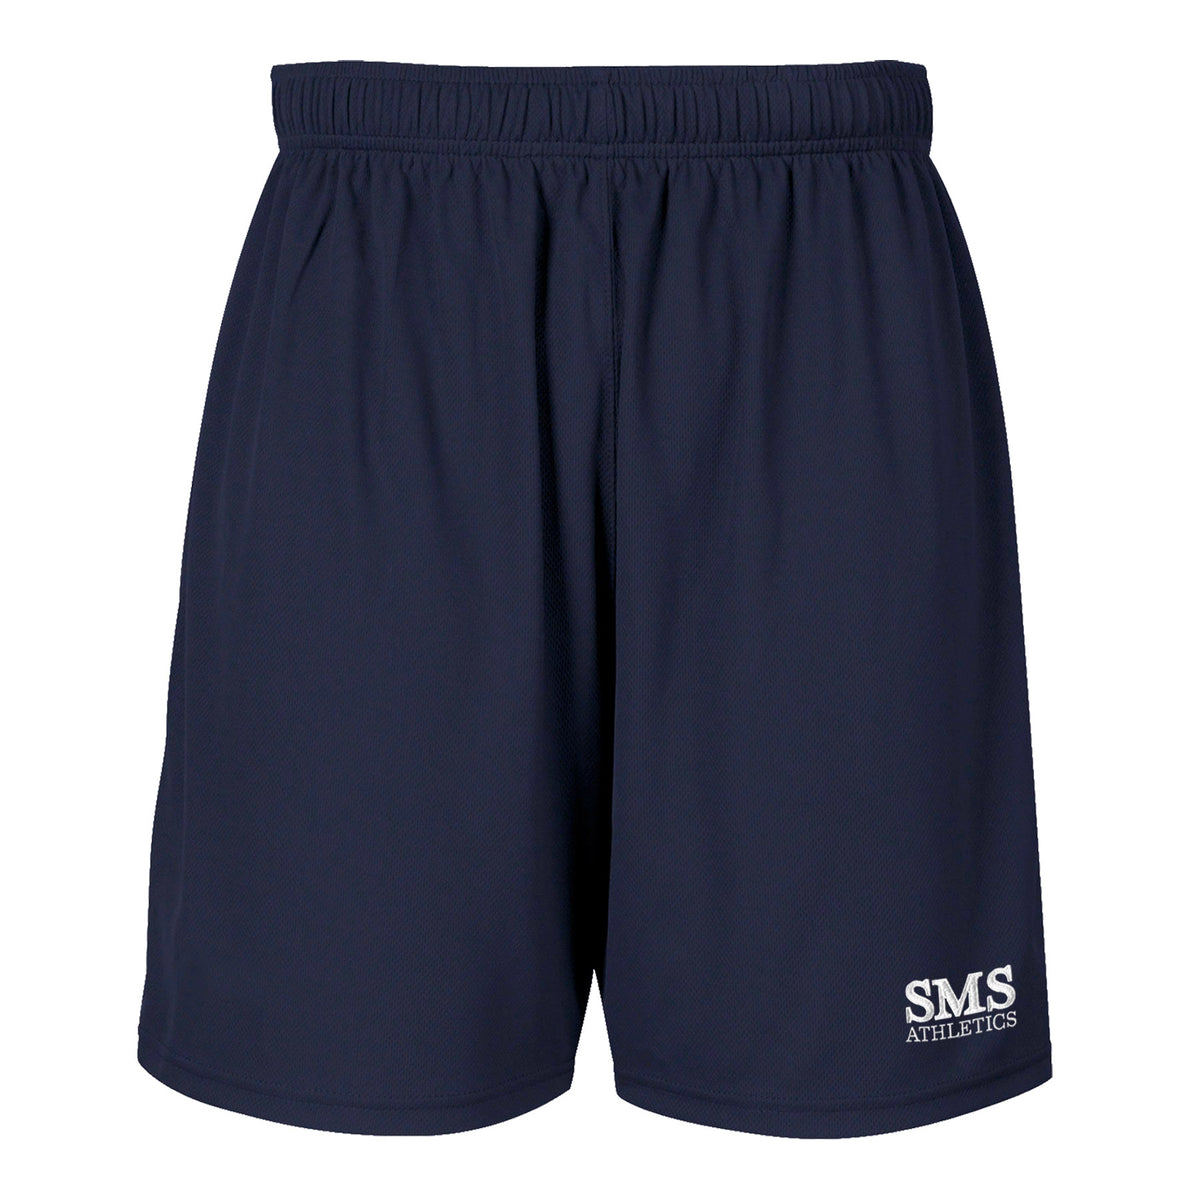 SMS GYM SHORTS, ADULT